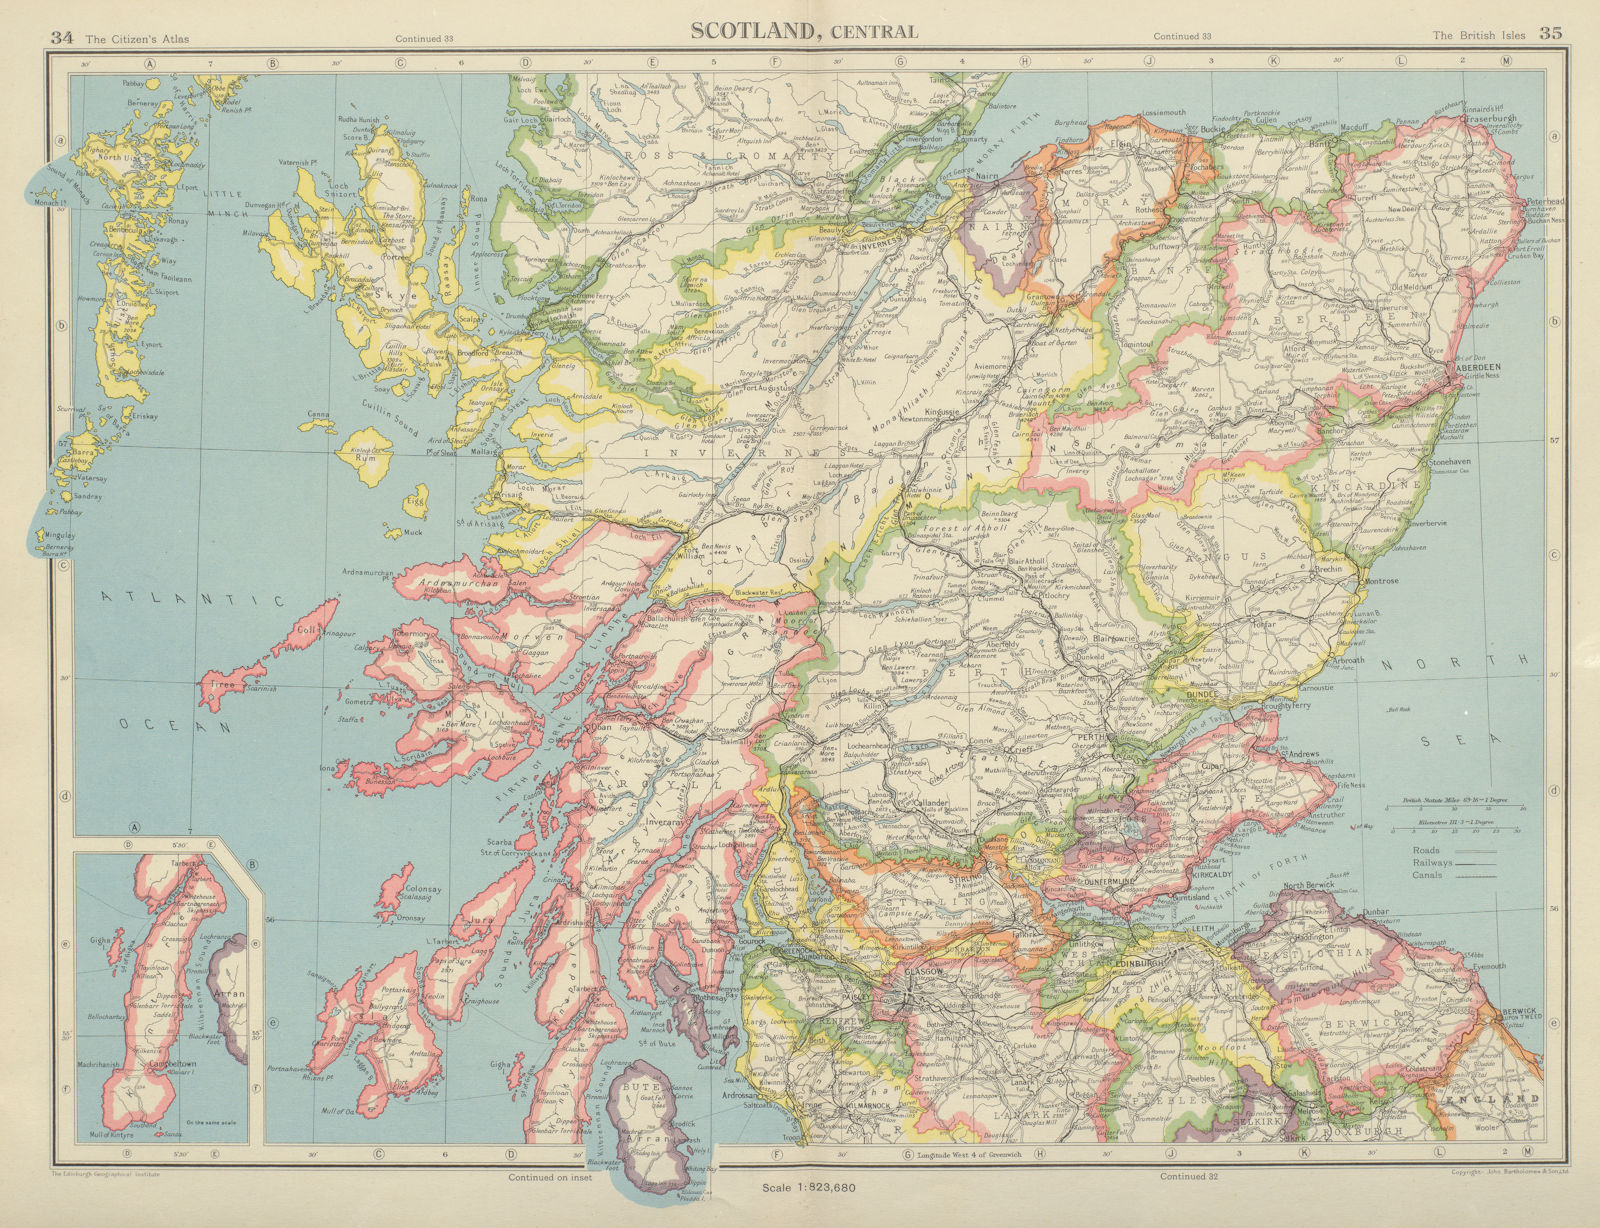 Associate Product CENTRAL SCOTLAND. Showing counties. BARTHOLOMEW 1947 old vintage map chart